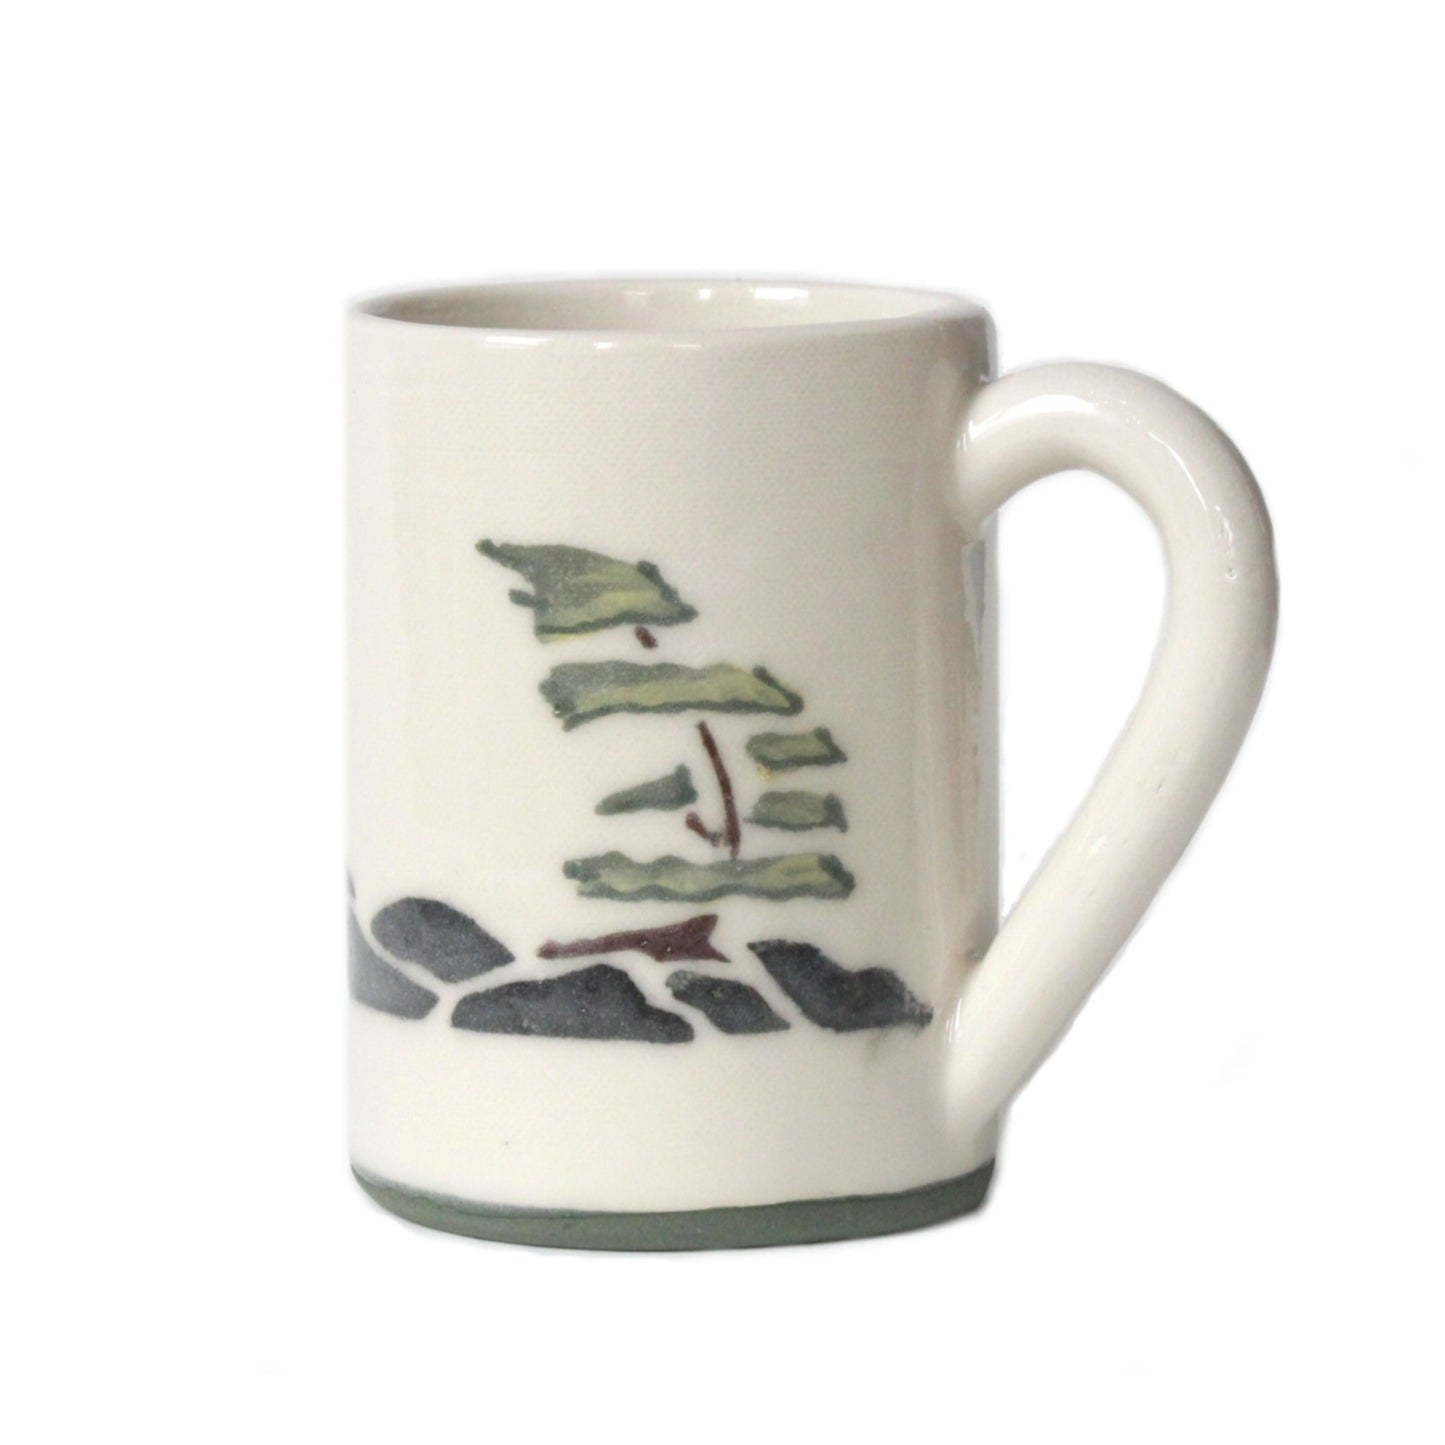 Handmade stoneware clay mug with windswept pine tree painting, made in Canada by Susan Robertson Pottery.